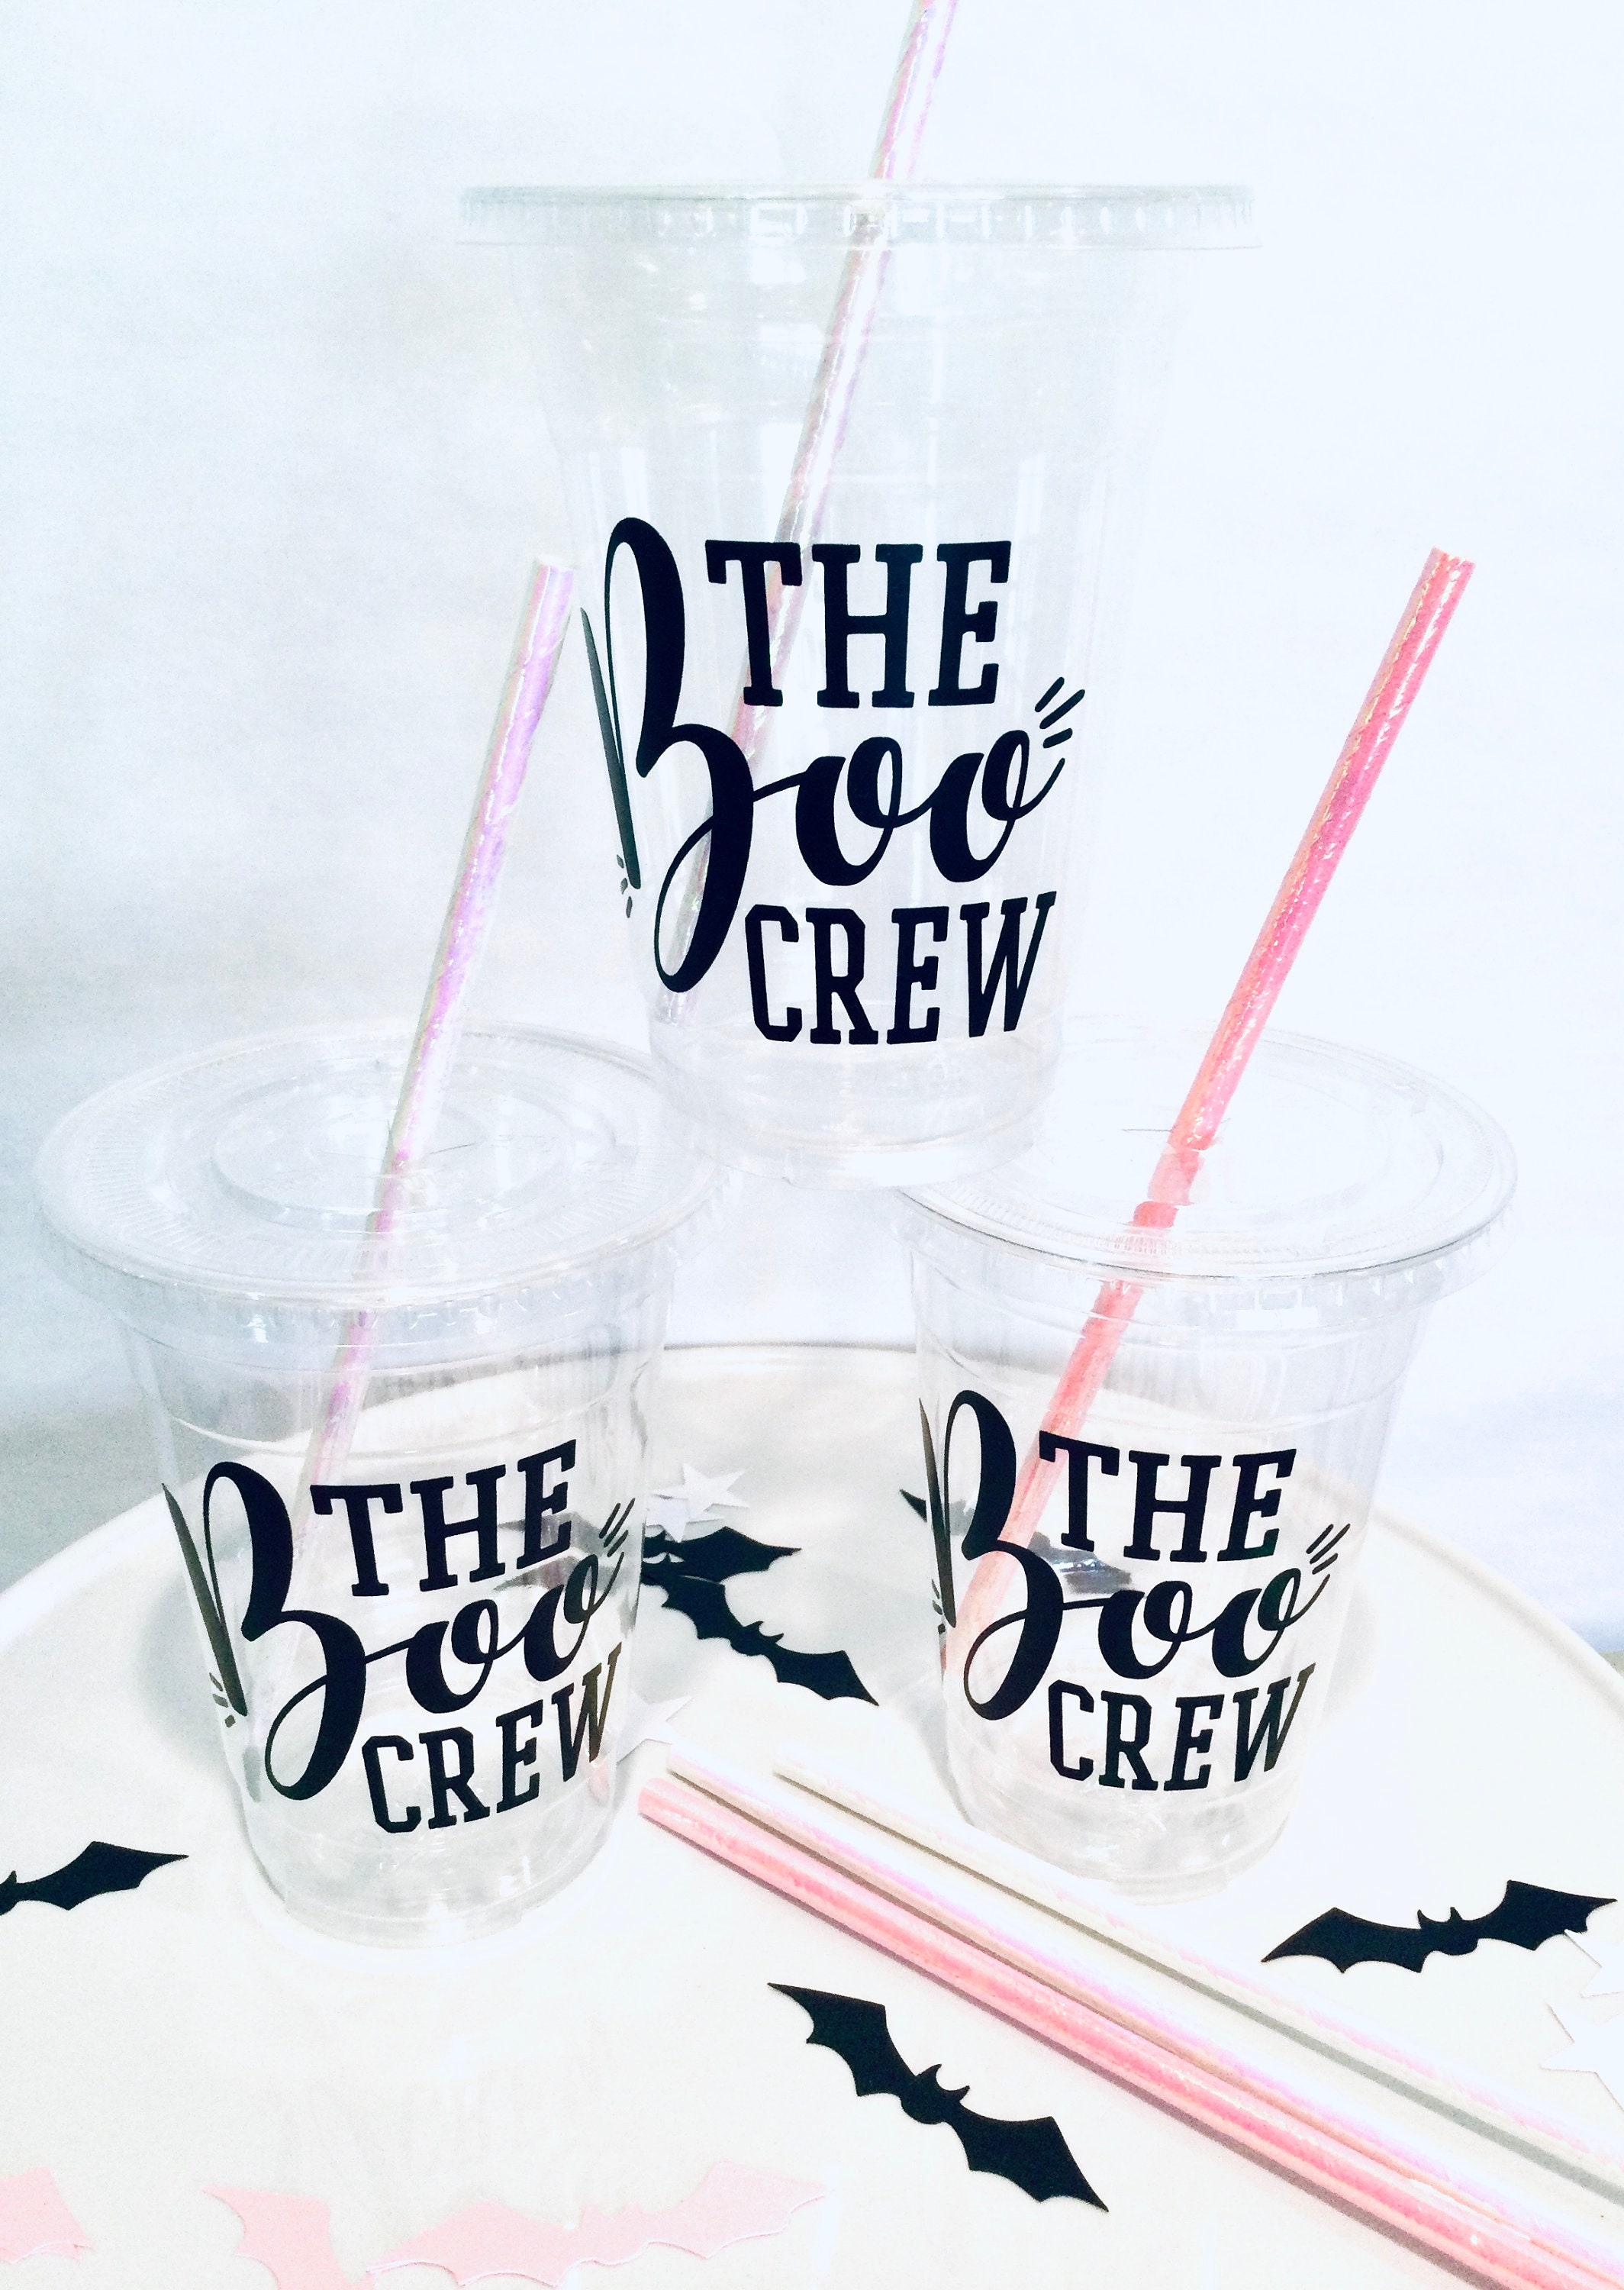 Witchs Brew Halloween Party Cups Plastic Disposable Lids and Straws  Included the Boo Crew Kids Party Halloween Birthday 